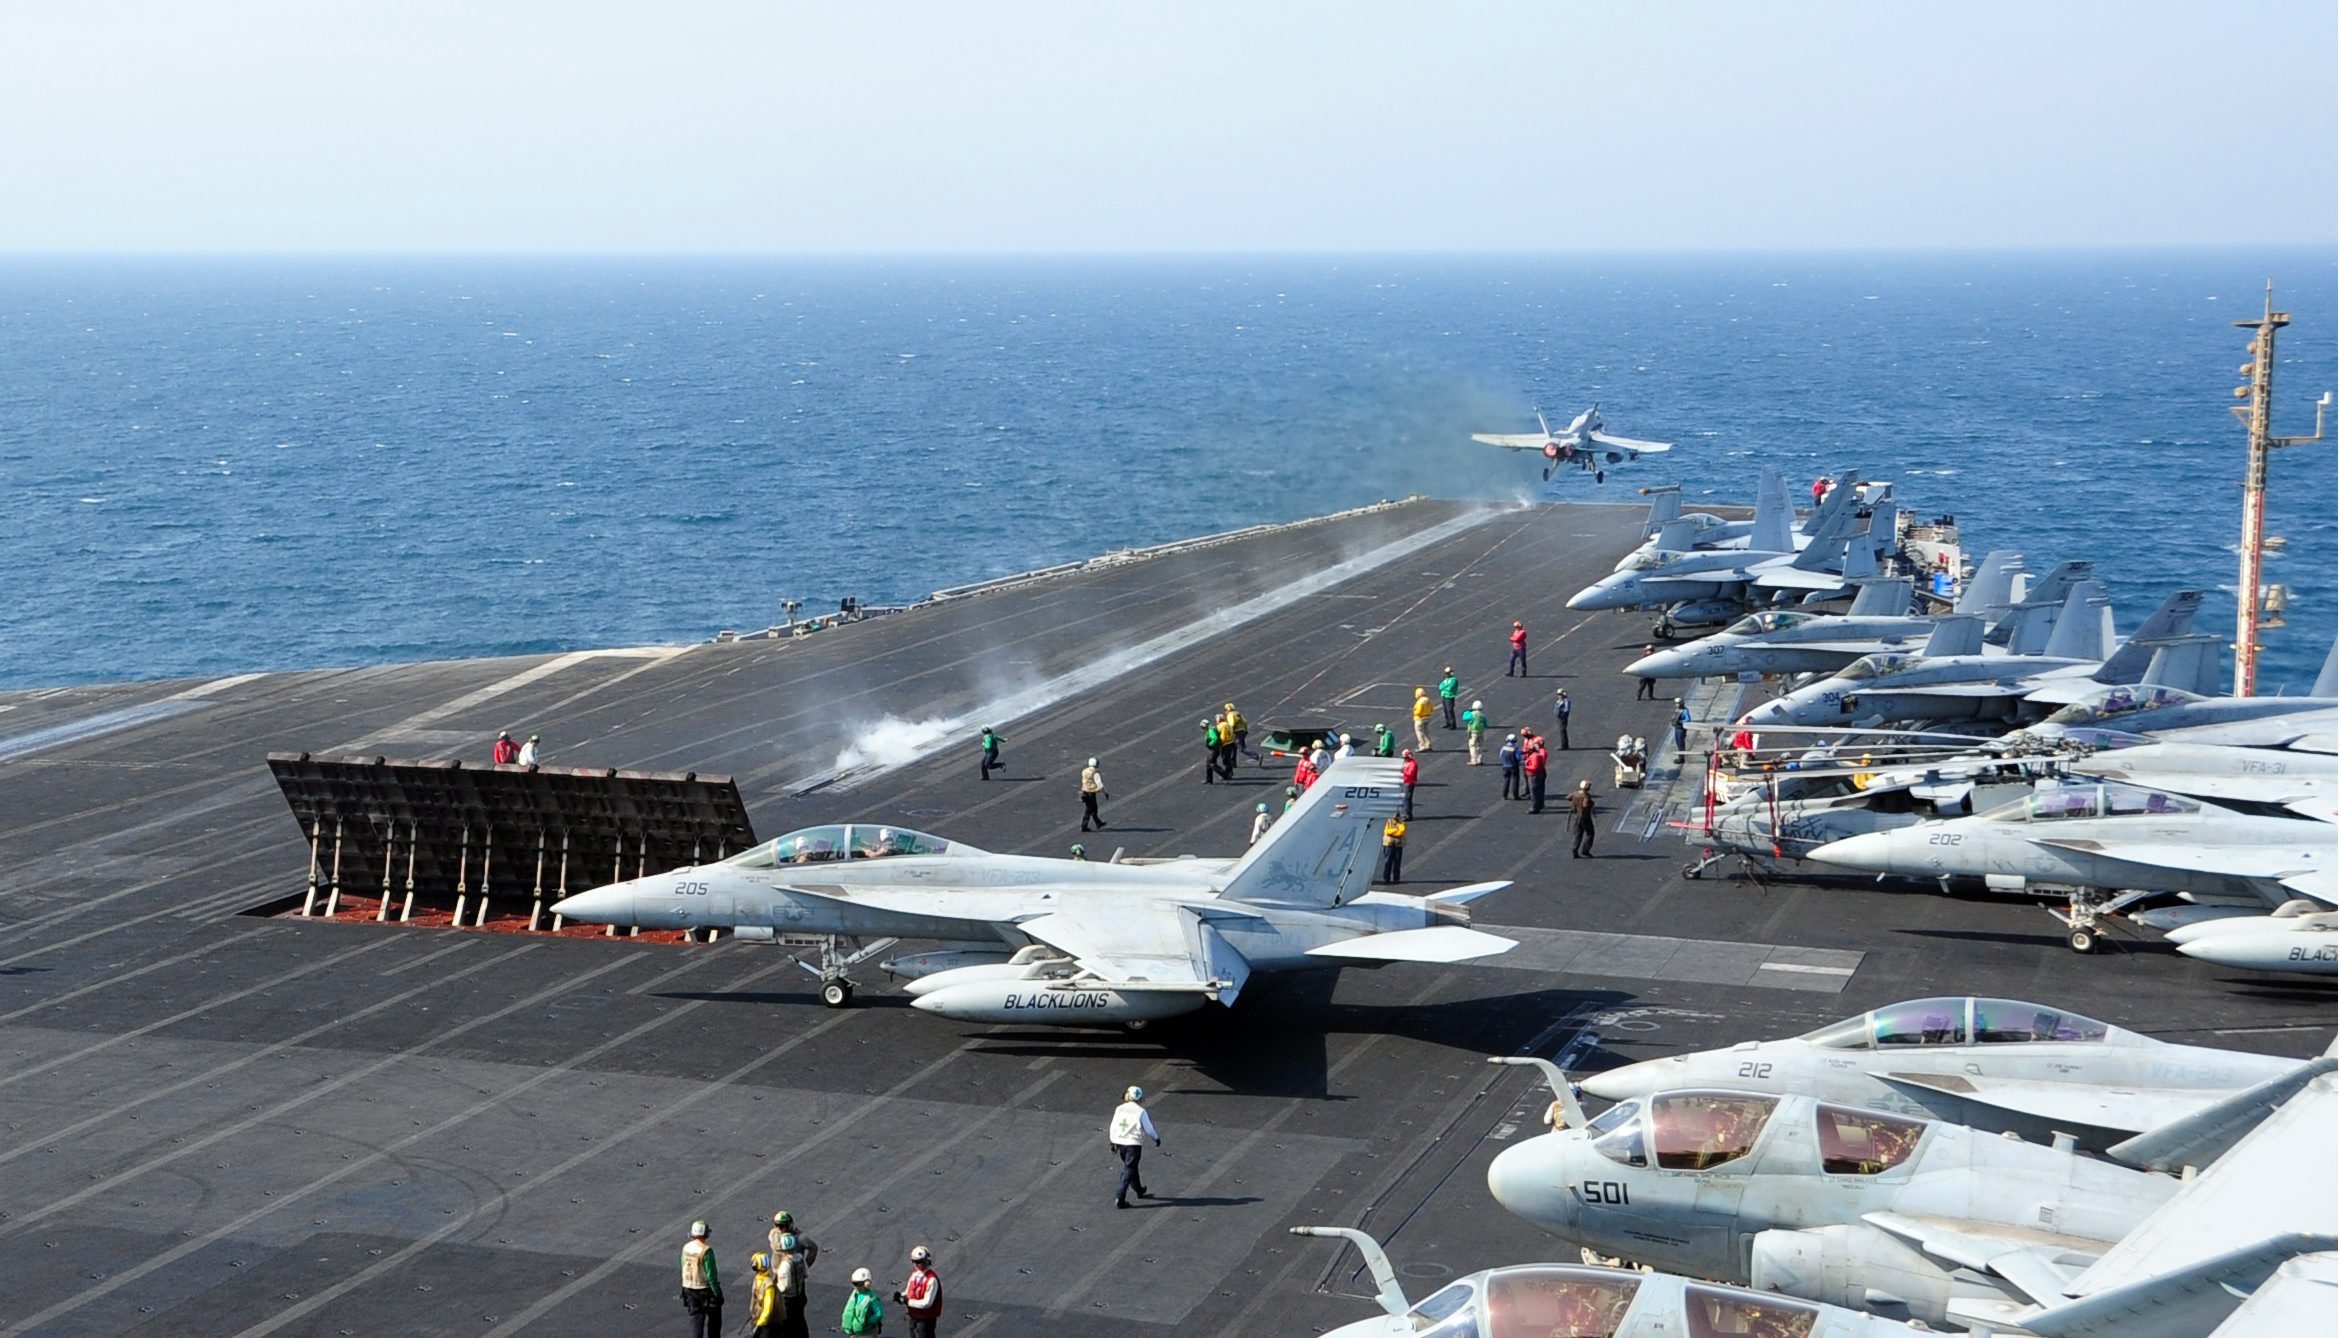 US Department of Defense (DOD) shows an aircraft launching from the flight deck of the aircraft carrier USS George H.W. Bush in the Arabian Gulf on Oct. 13, 2014.